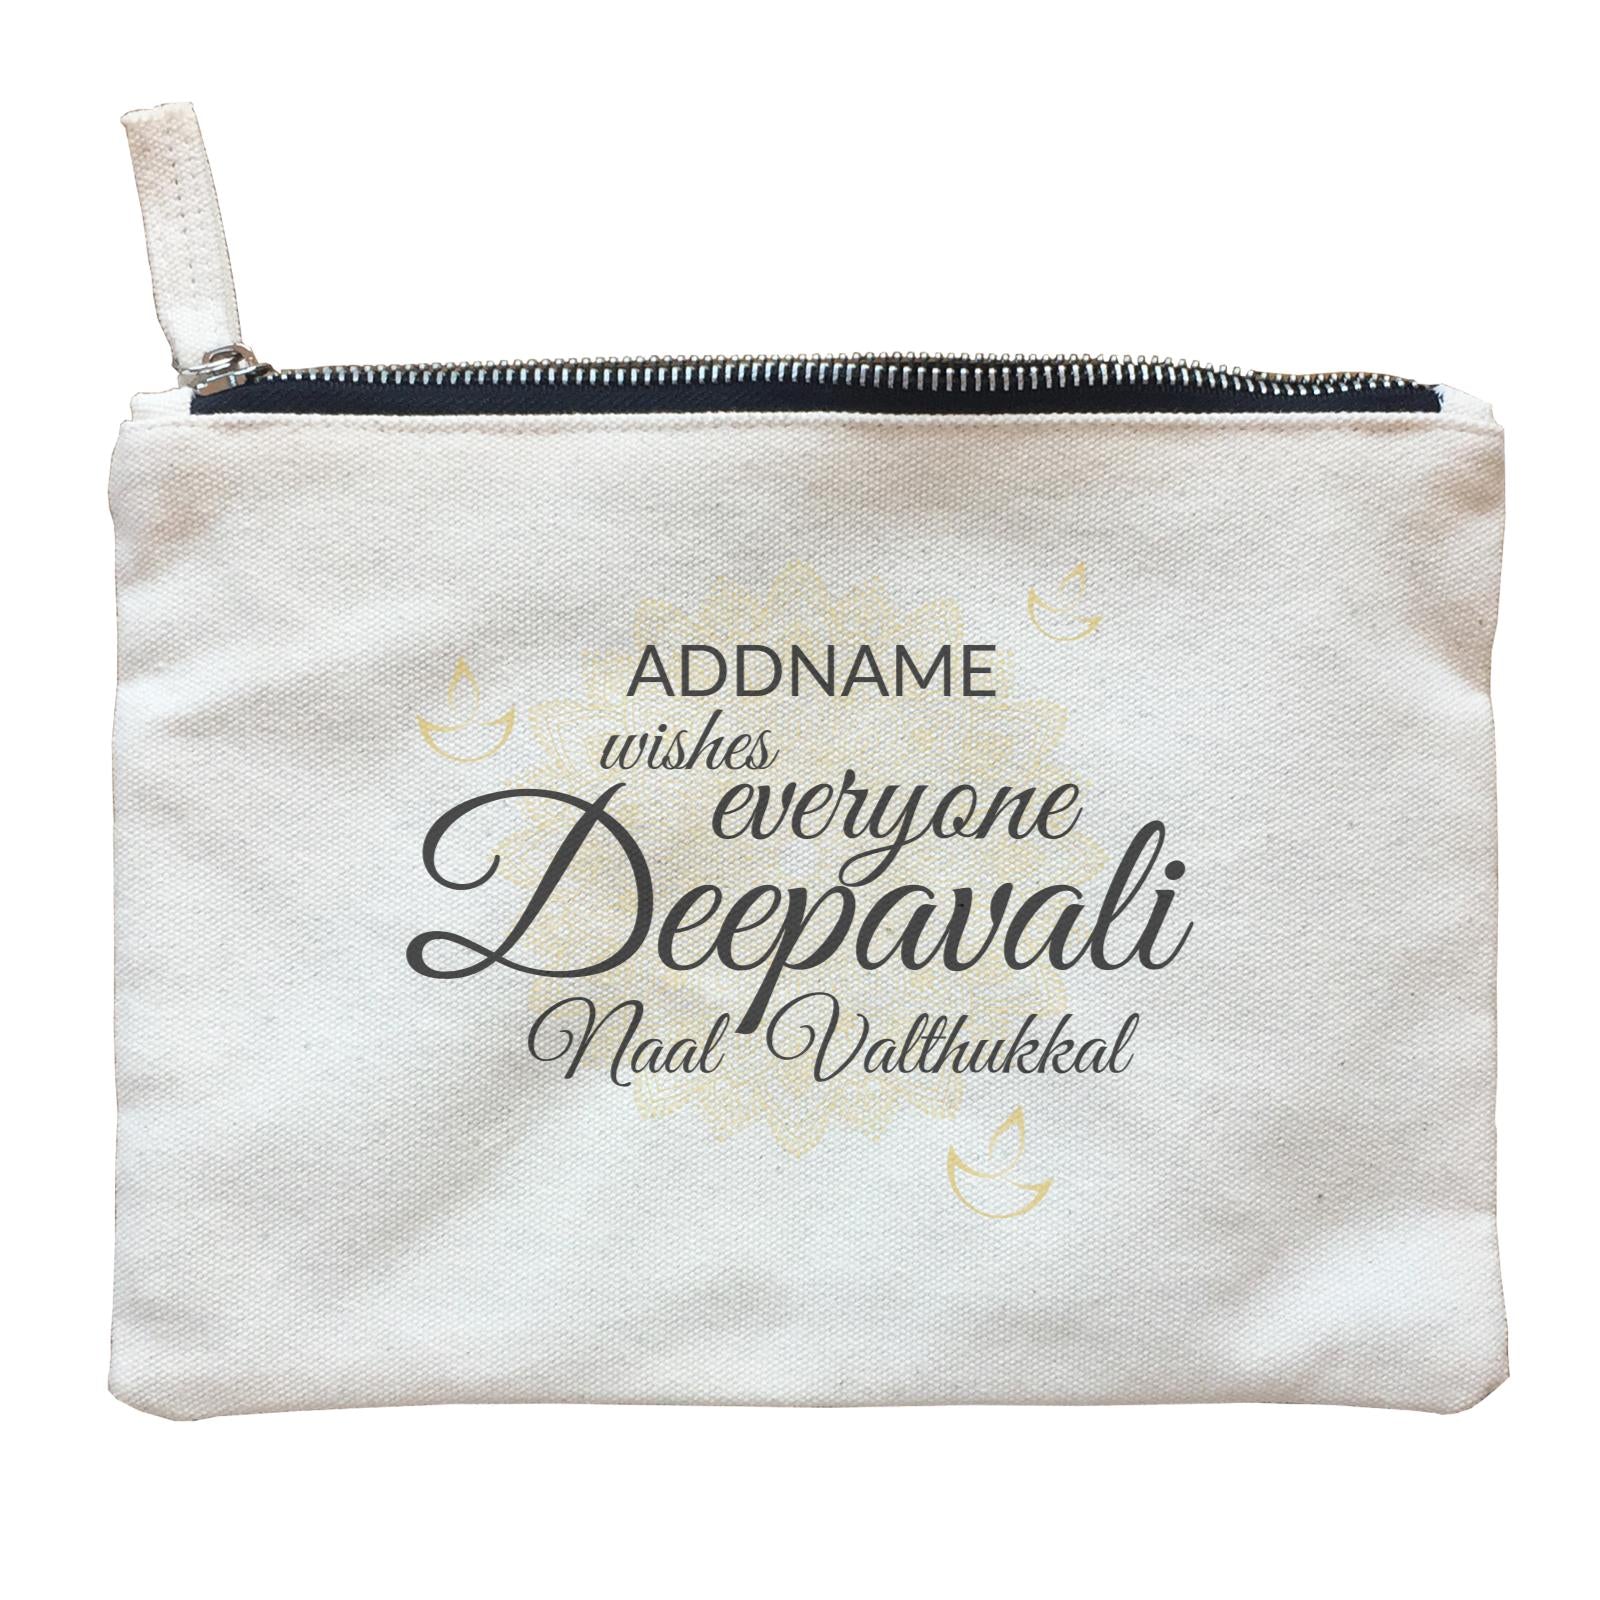 Addname Wishes Everyone Deepavali with Mandala Zipper Pouch